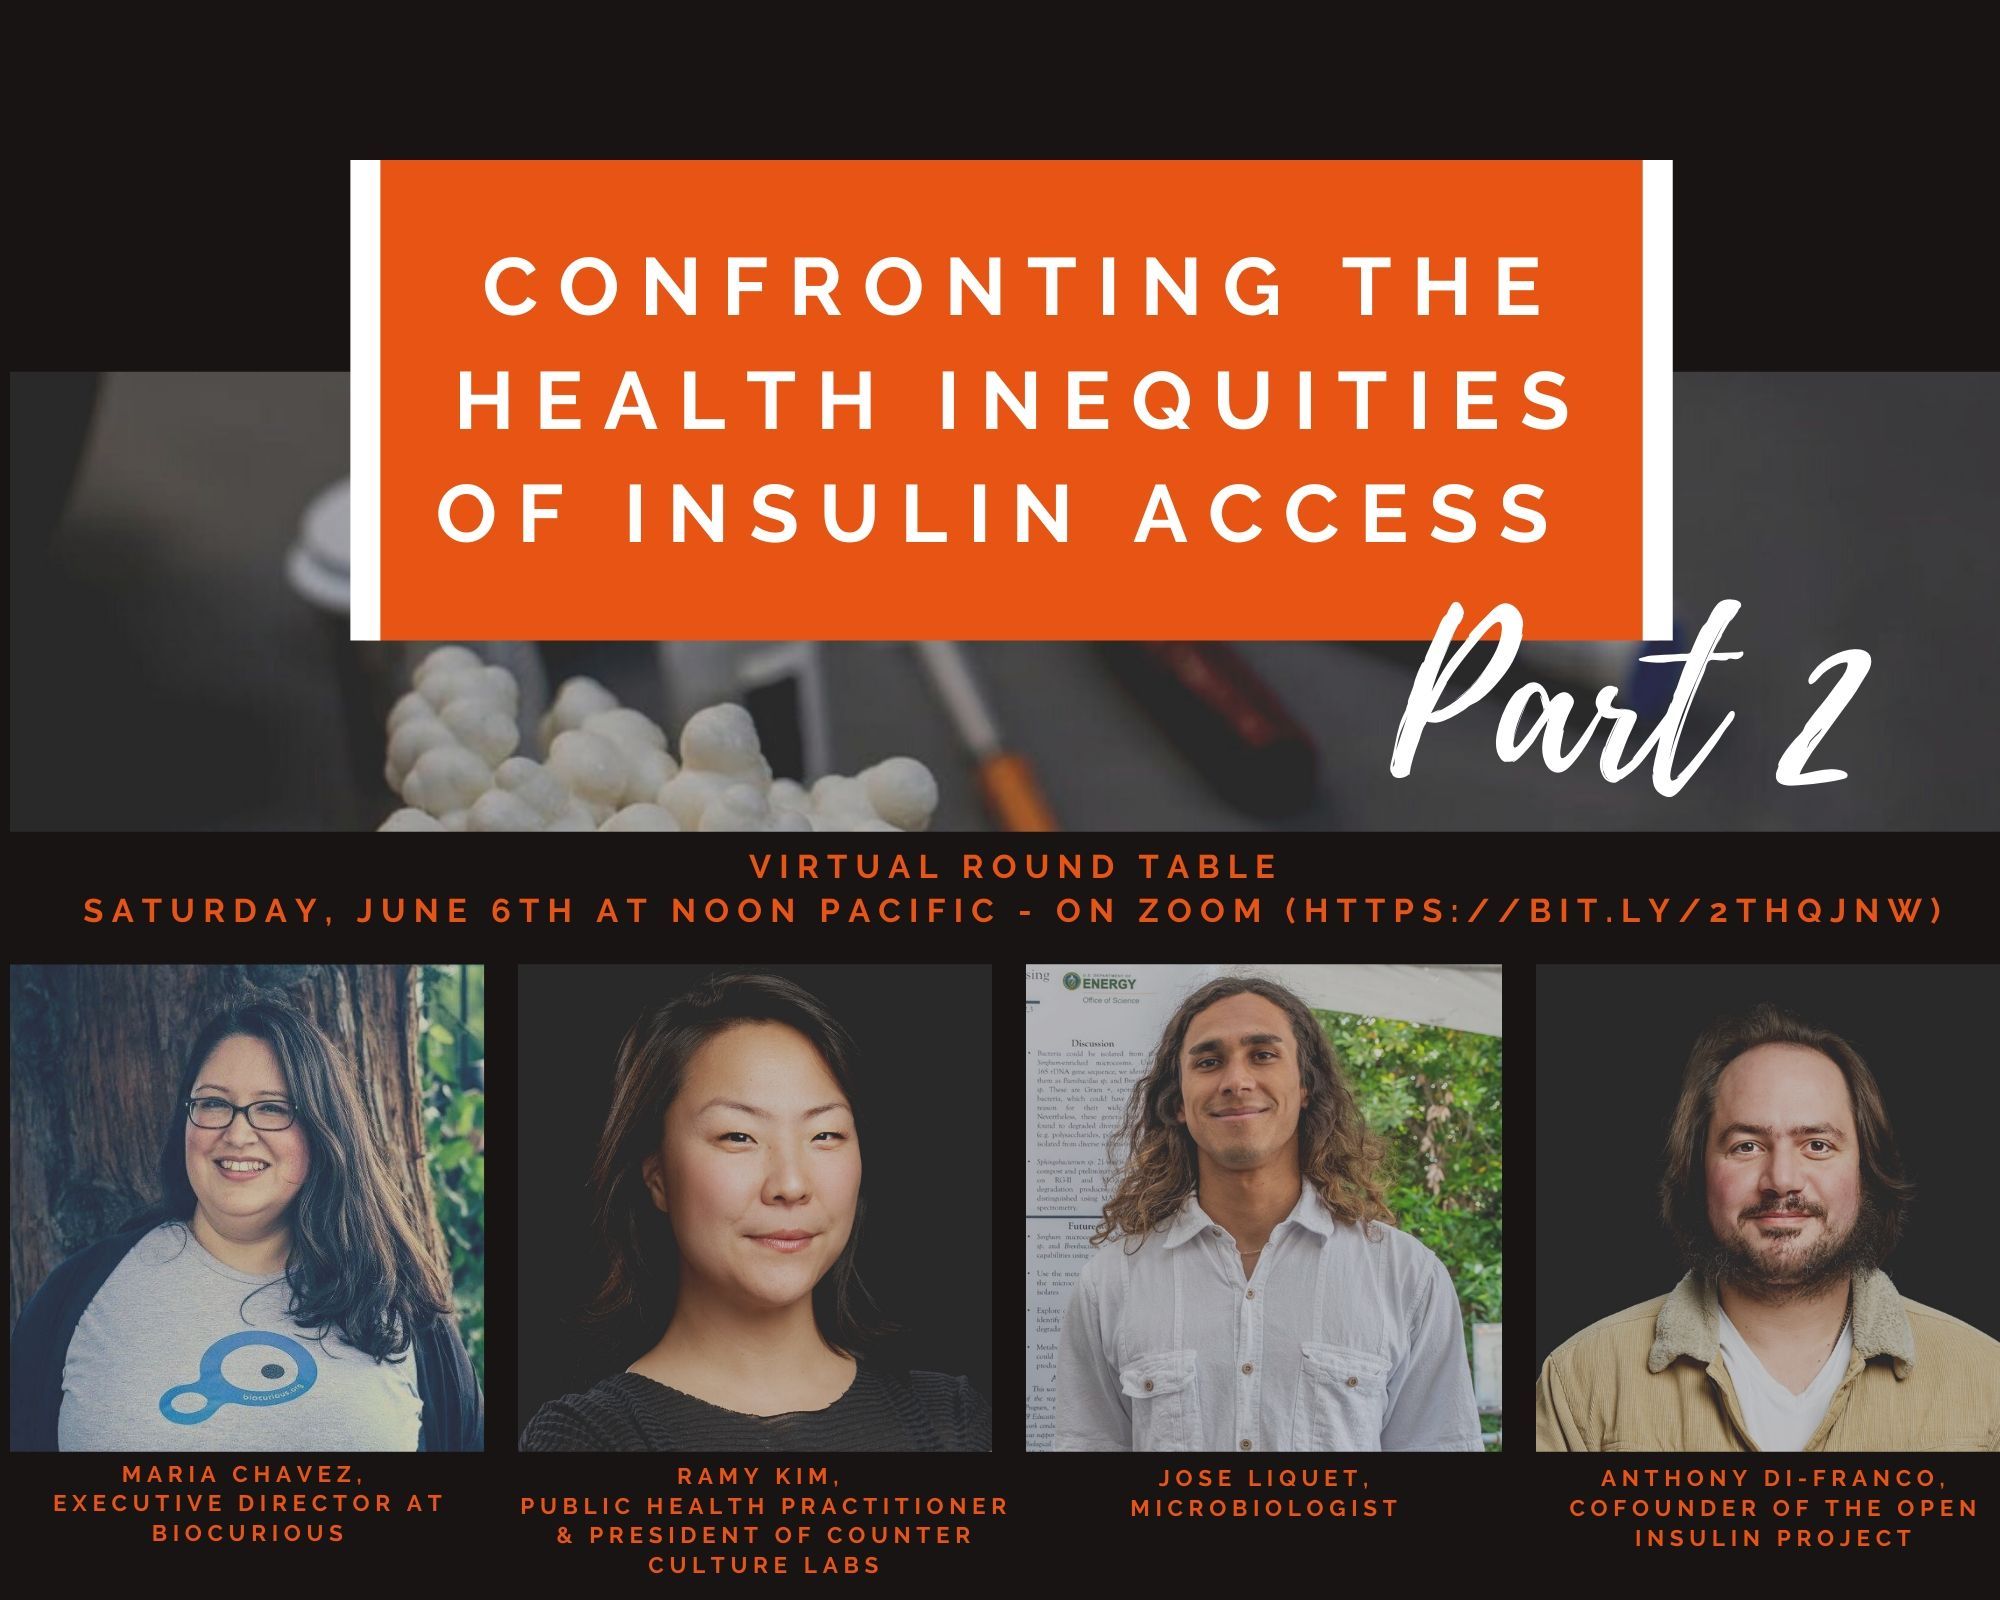 CONFRONTING THE HEALTH INEQUITIES OF INSULIN ACCESS: Virtual Round Table Saturday, June 6th at Noon Pacific - On Zoom (https://bit.ly/2thqjnw)